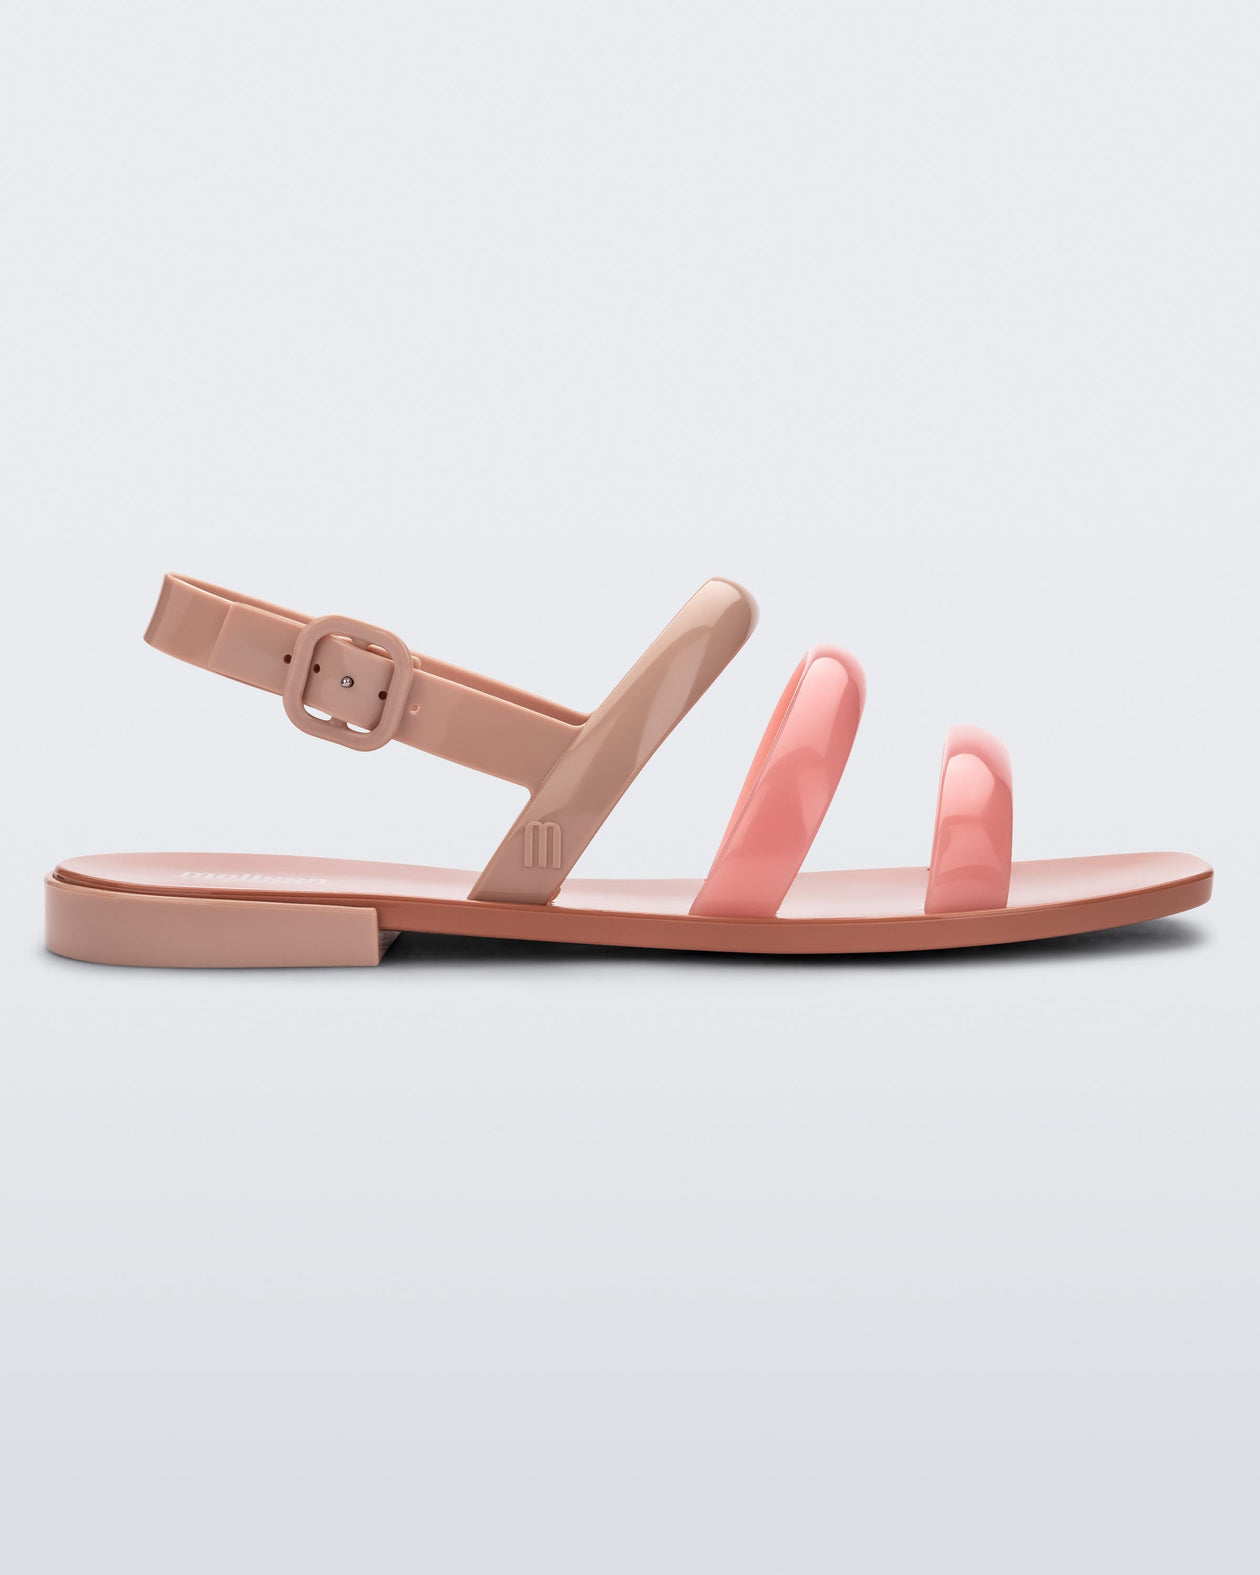 Side view of a beige and pink Essential Wave women's sandal with adjustable buckle.